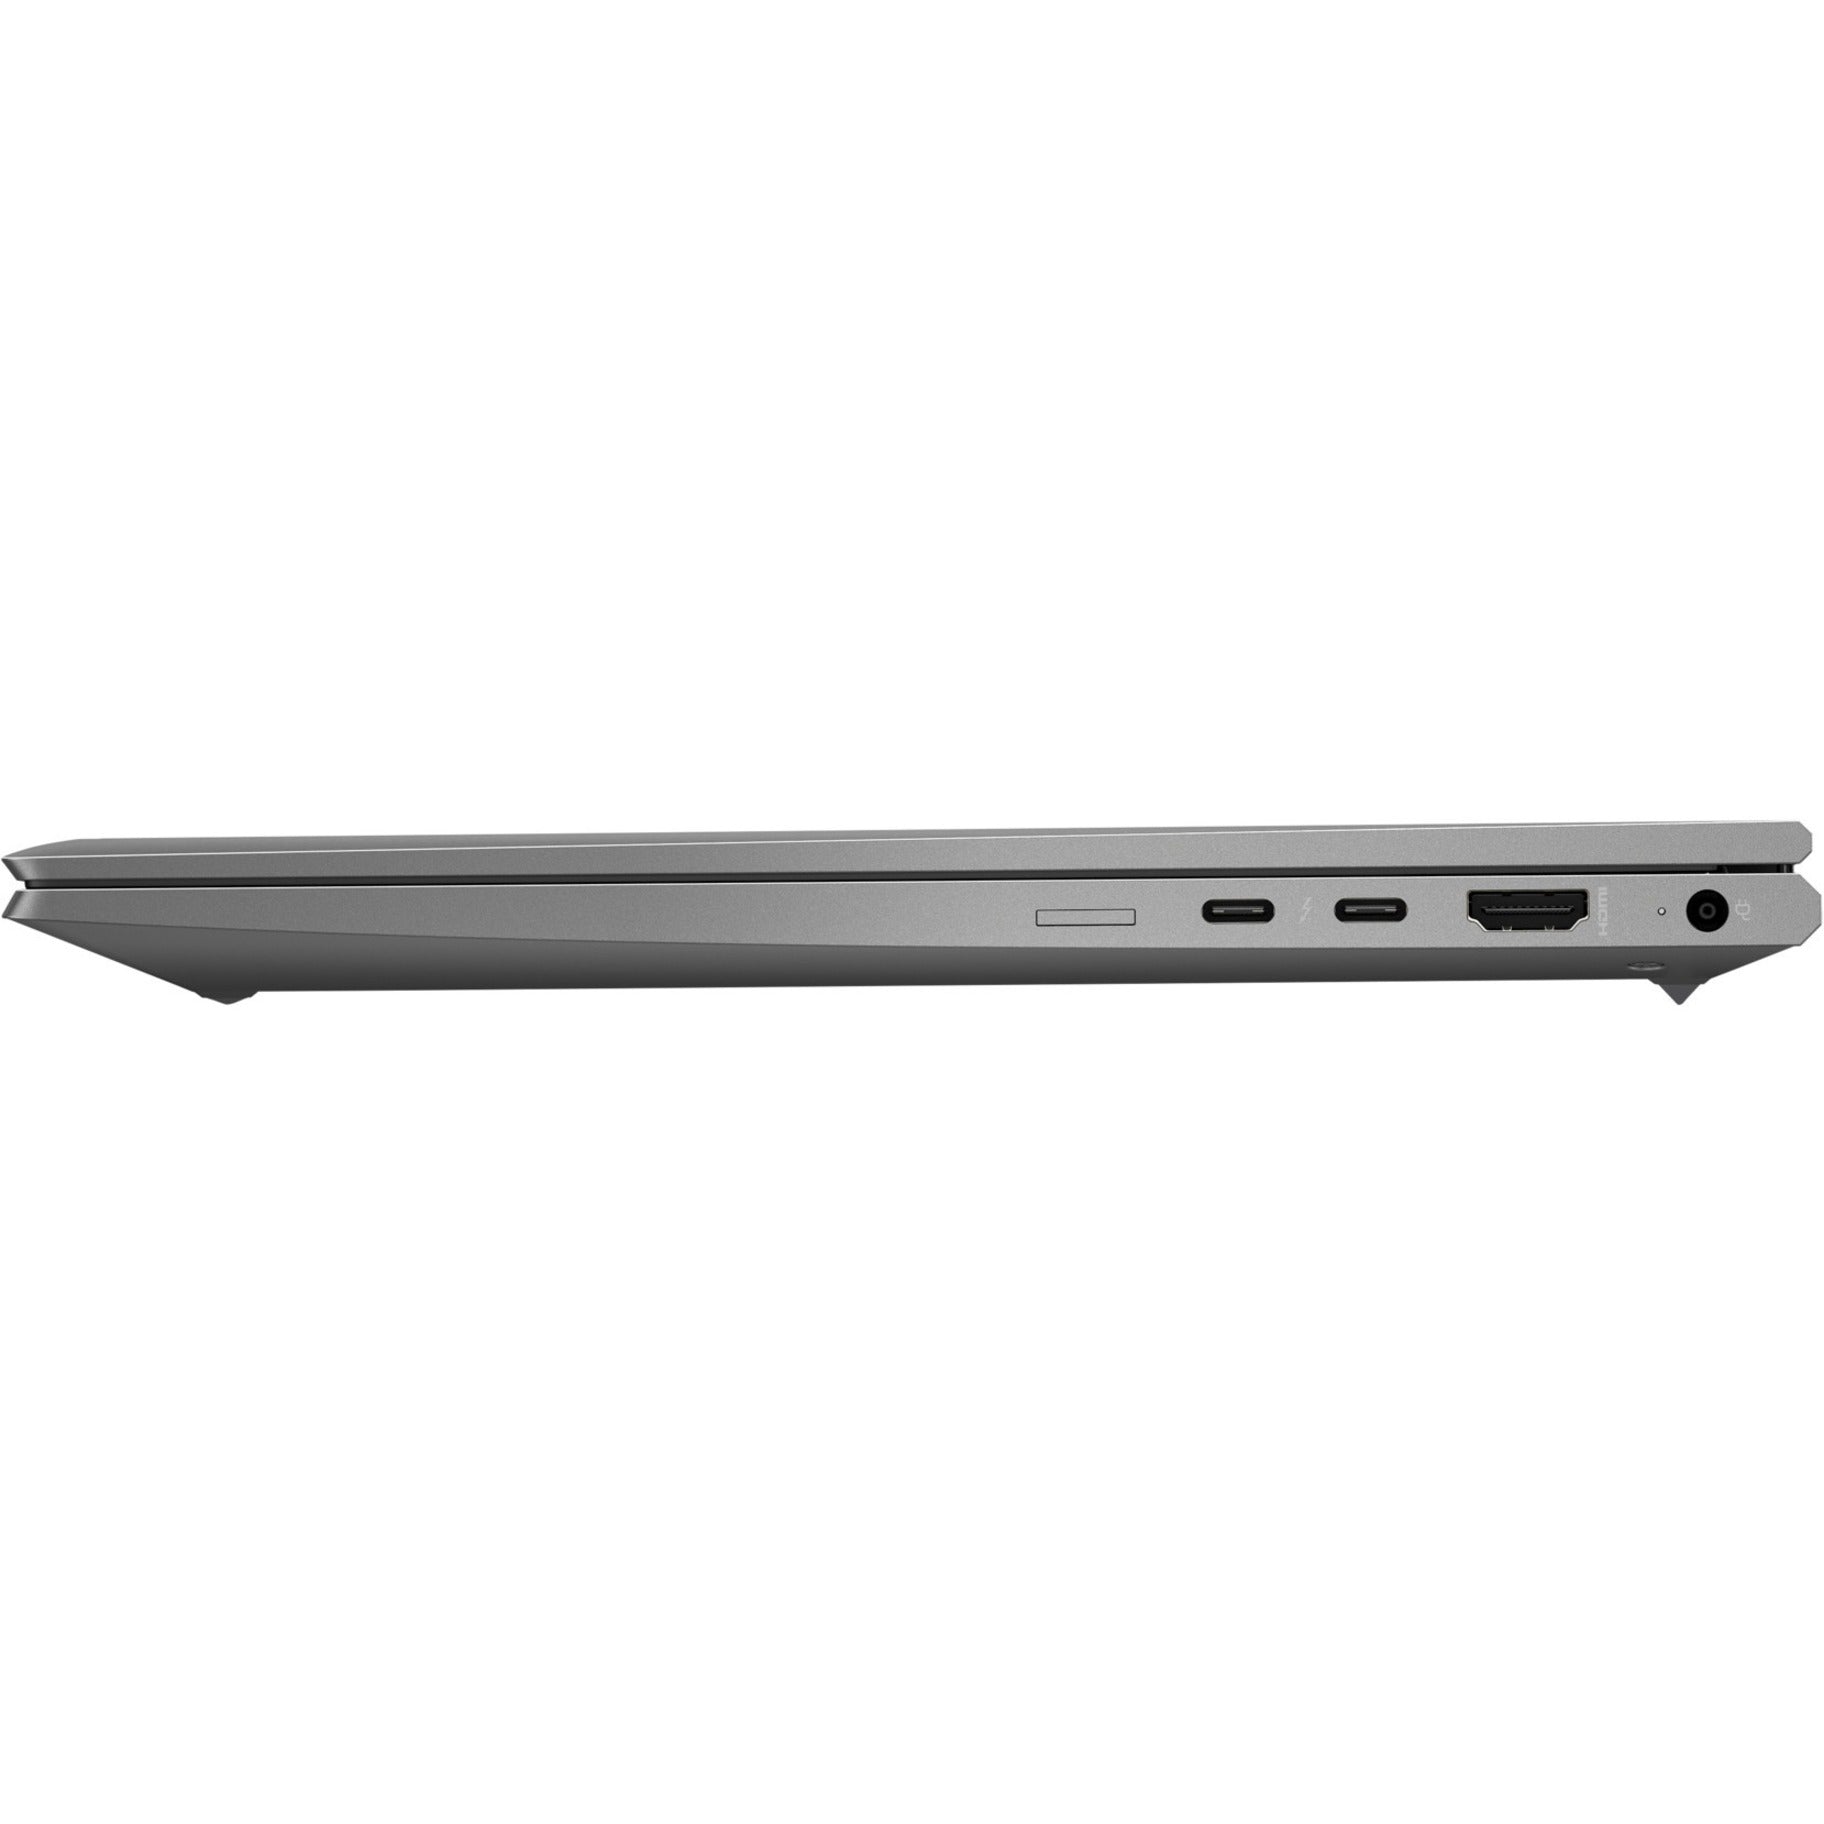 HPI SOURCING - NEW ZBook Firefly 14 G8 Mobile Workstation, Full HD, Intel Core i7 11th Gen, 16GB RAM, 512GB SSD